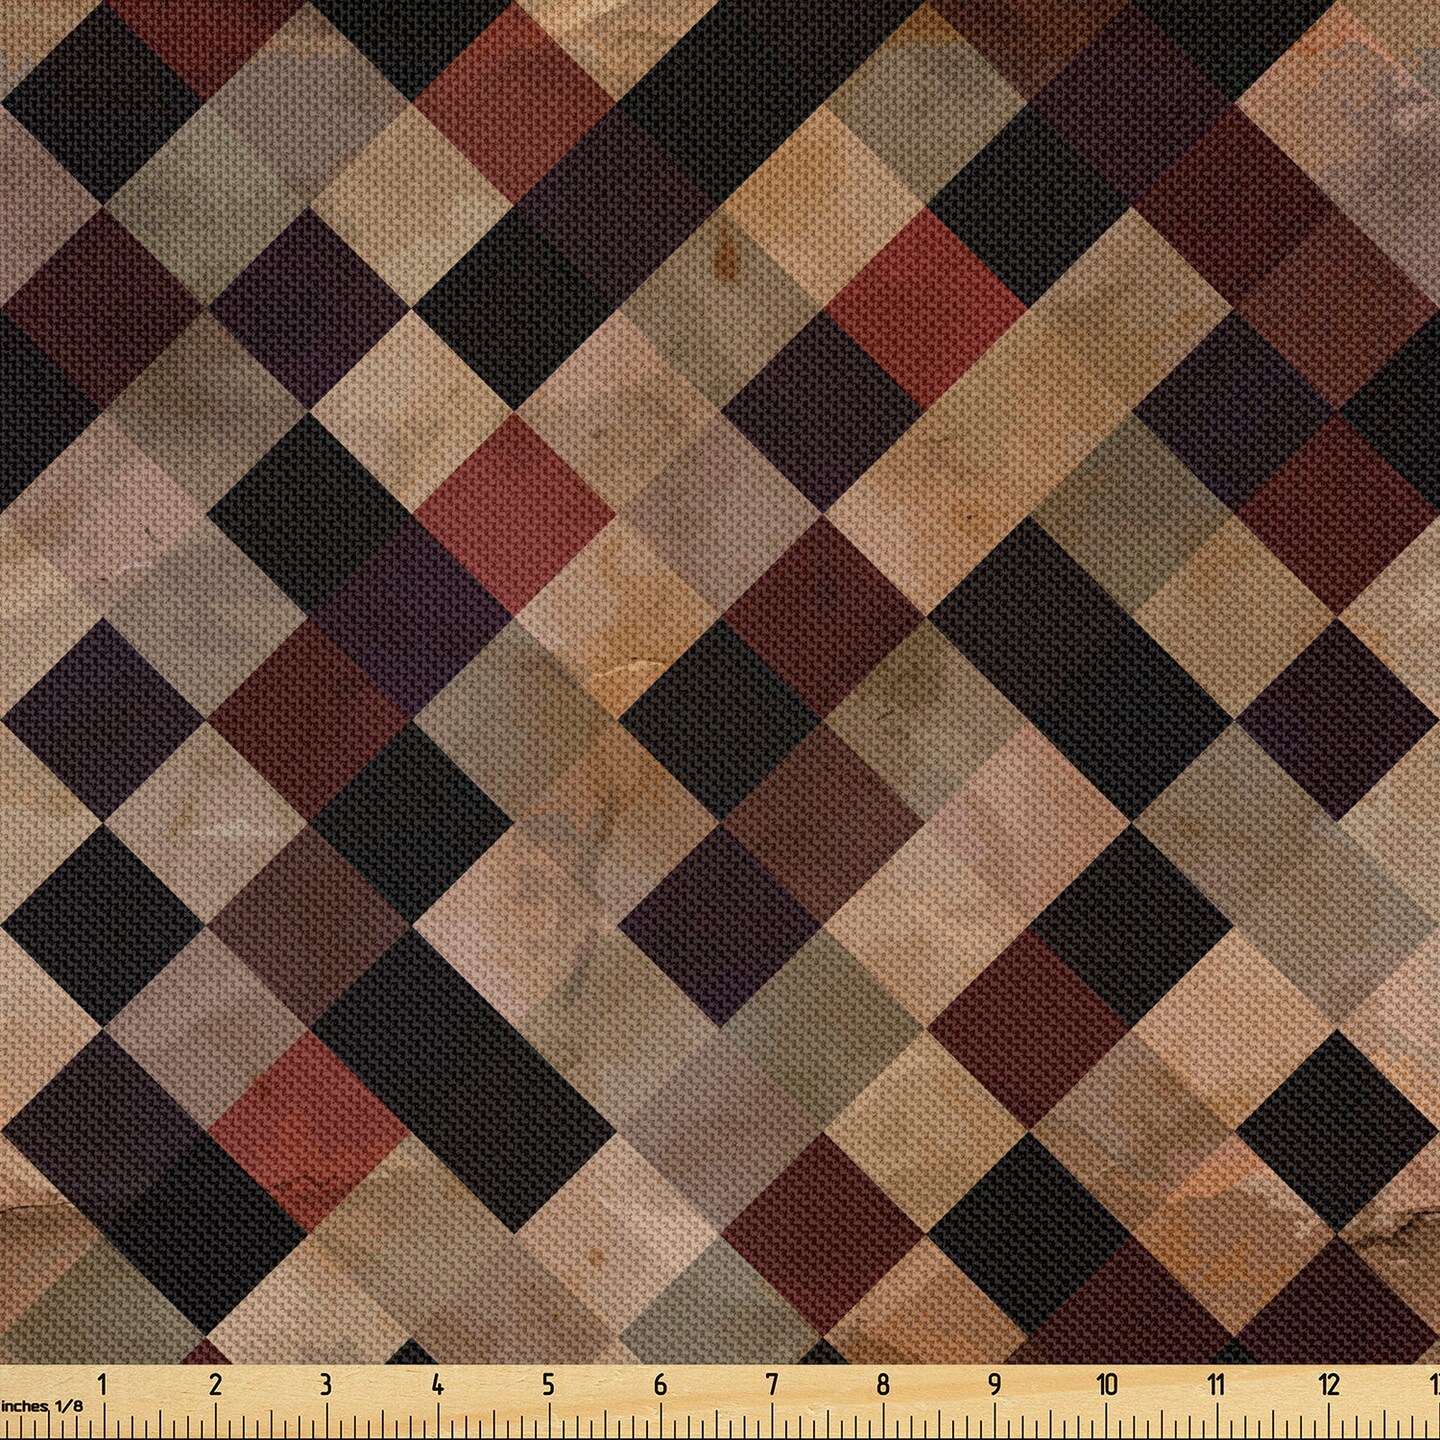 Ambesonne Grunge Fabric by The Yard, Antique Looking Checkered Pattern in Brown Tones Vintage Grid Aged Display, Decorative Satin Fabric for Home Textiles and Crafts, 5 Yards, Multicolor